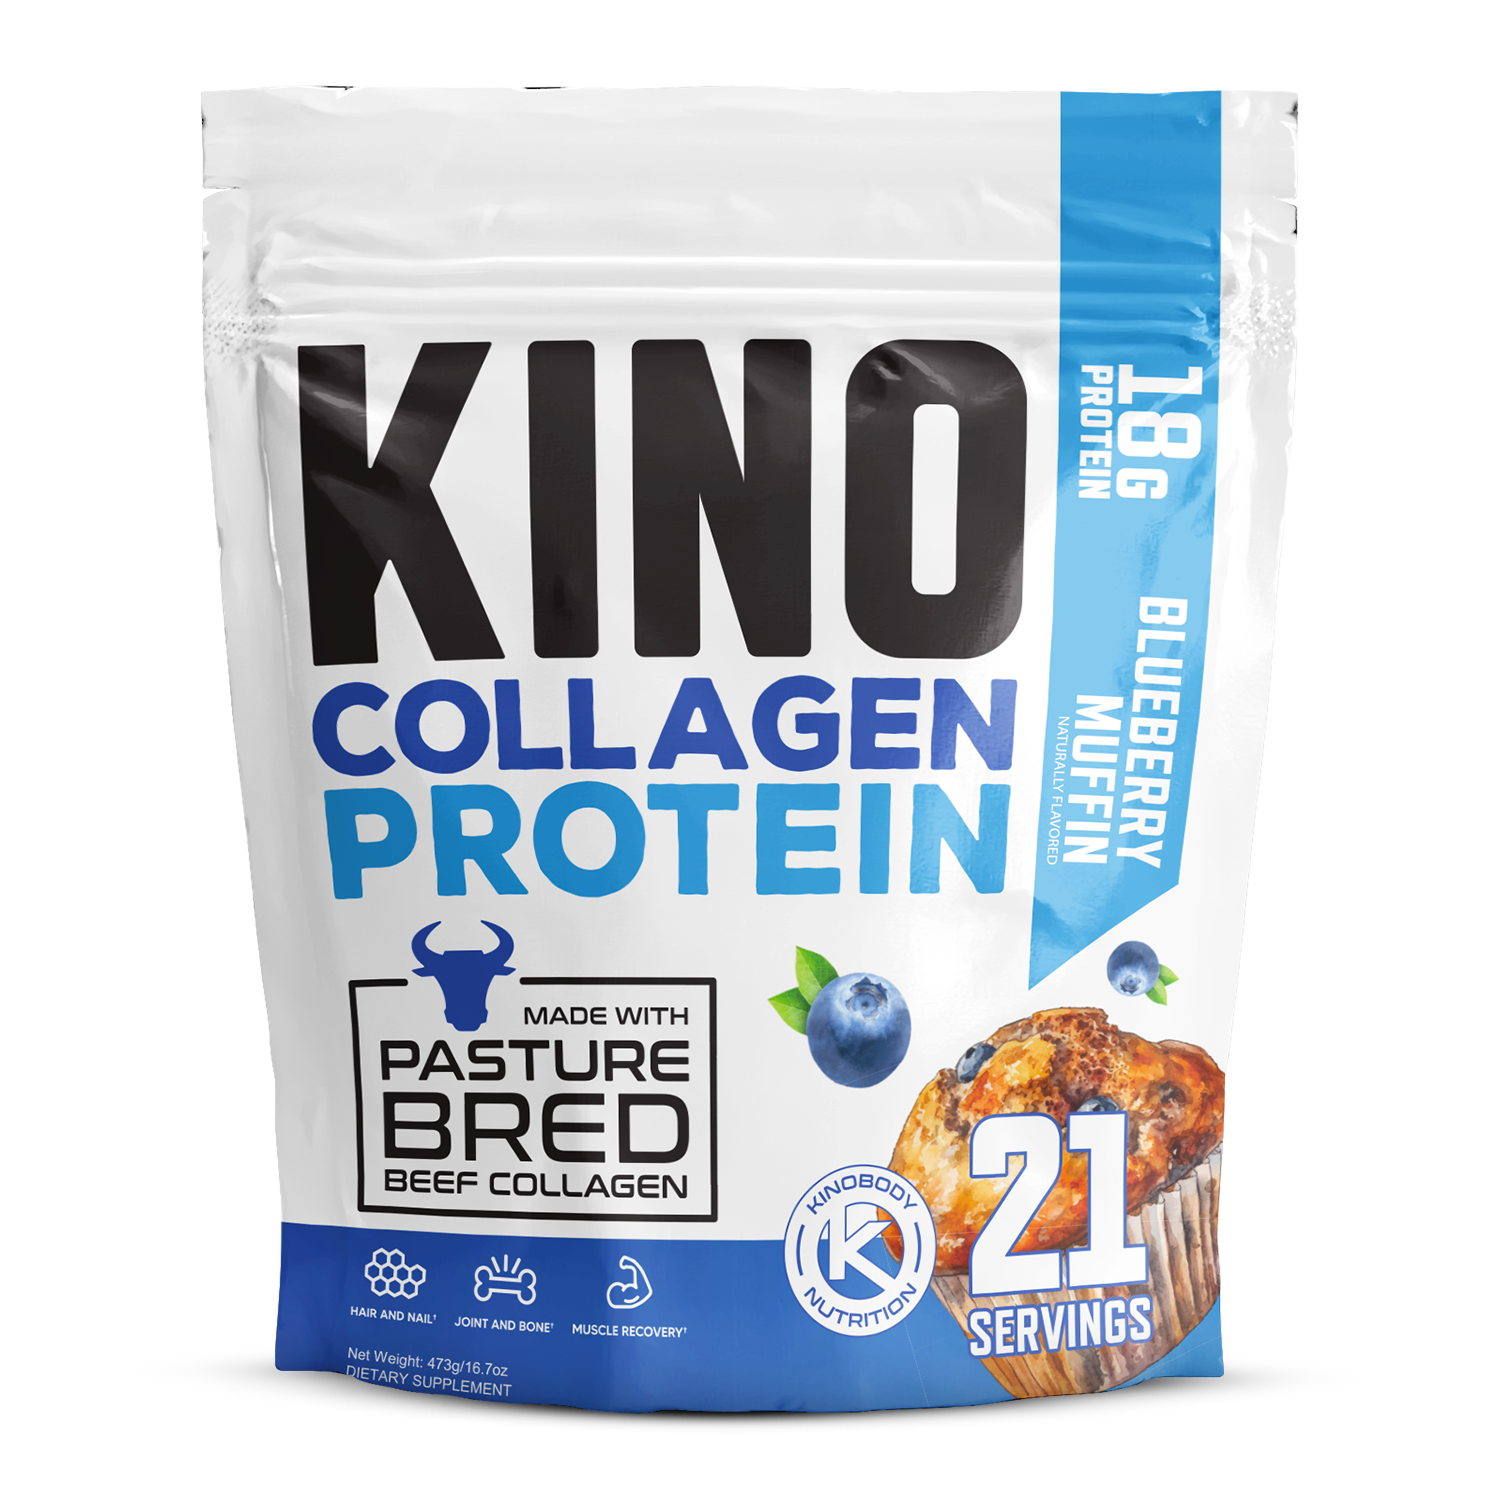 Kino Collagen Protein: Build Muscle & Fortify Your Body